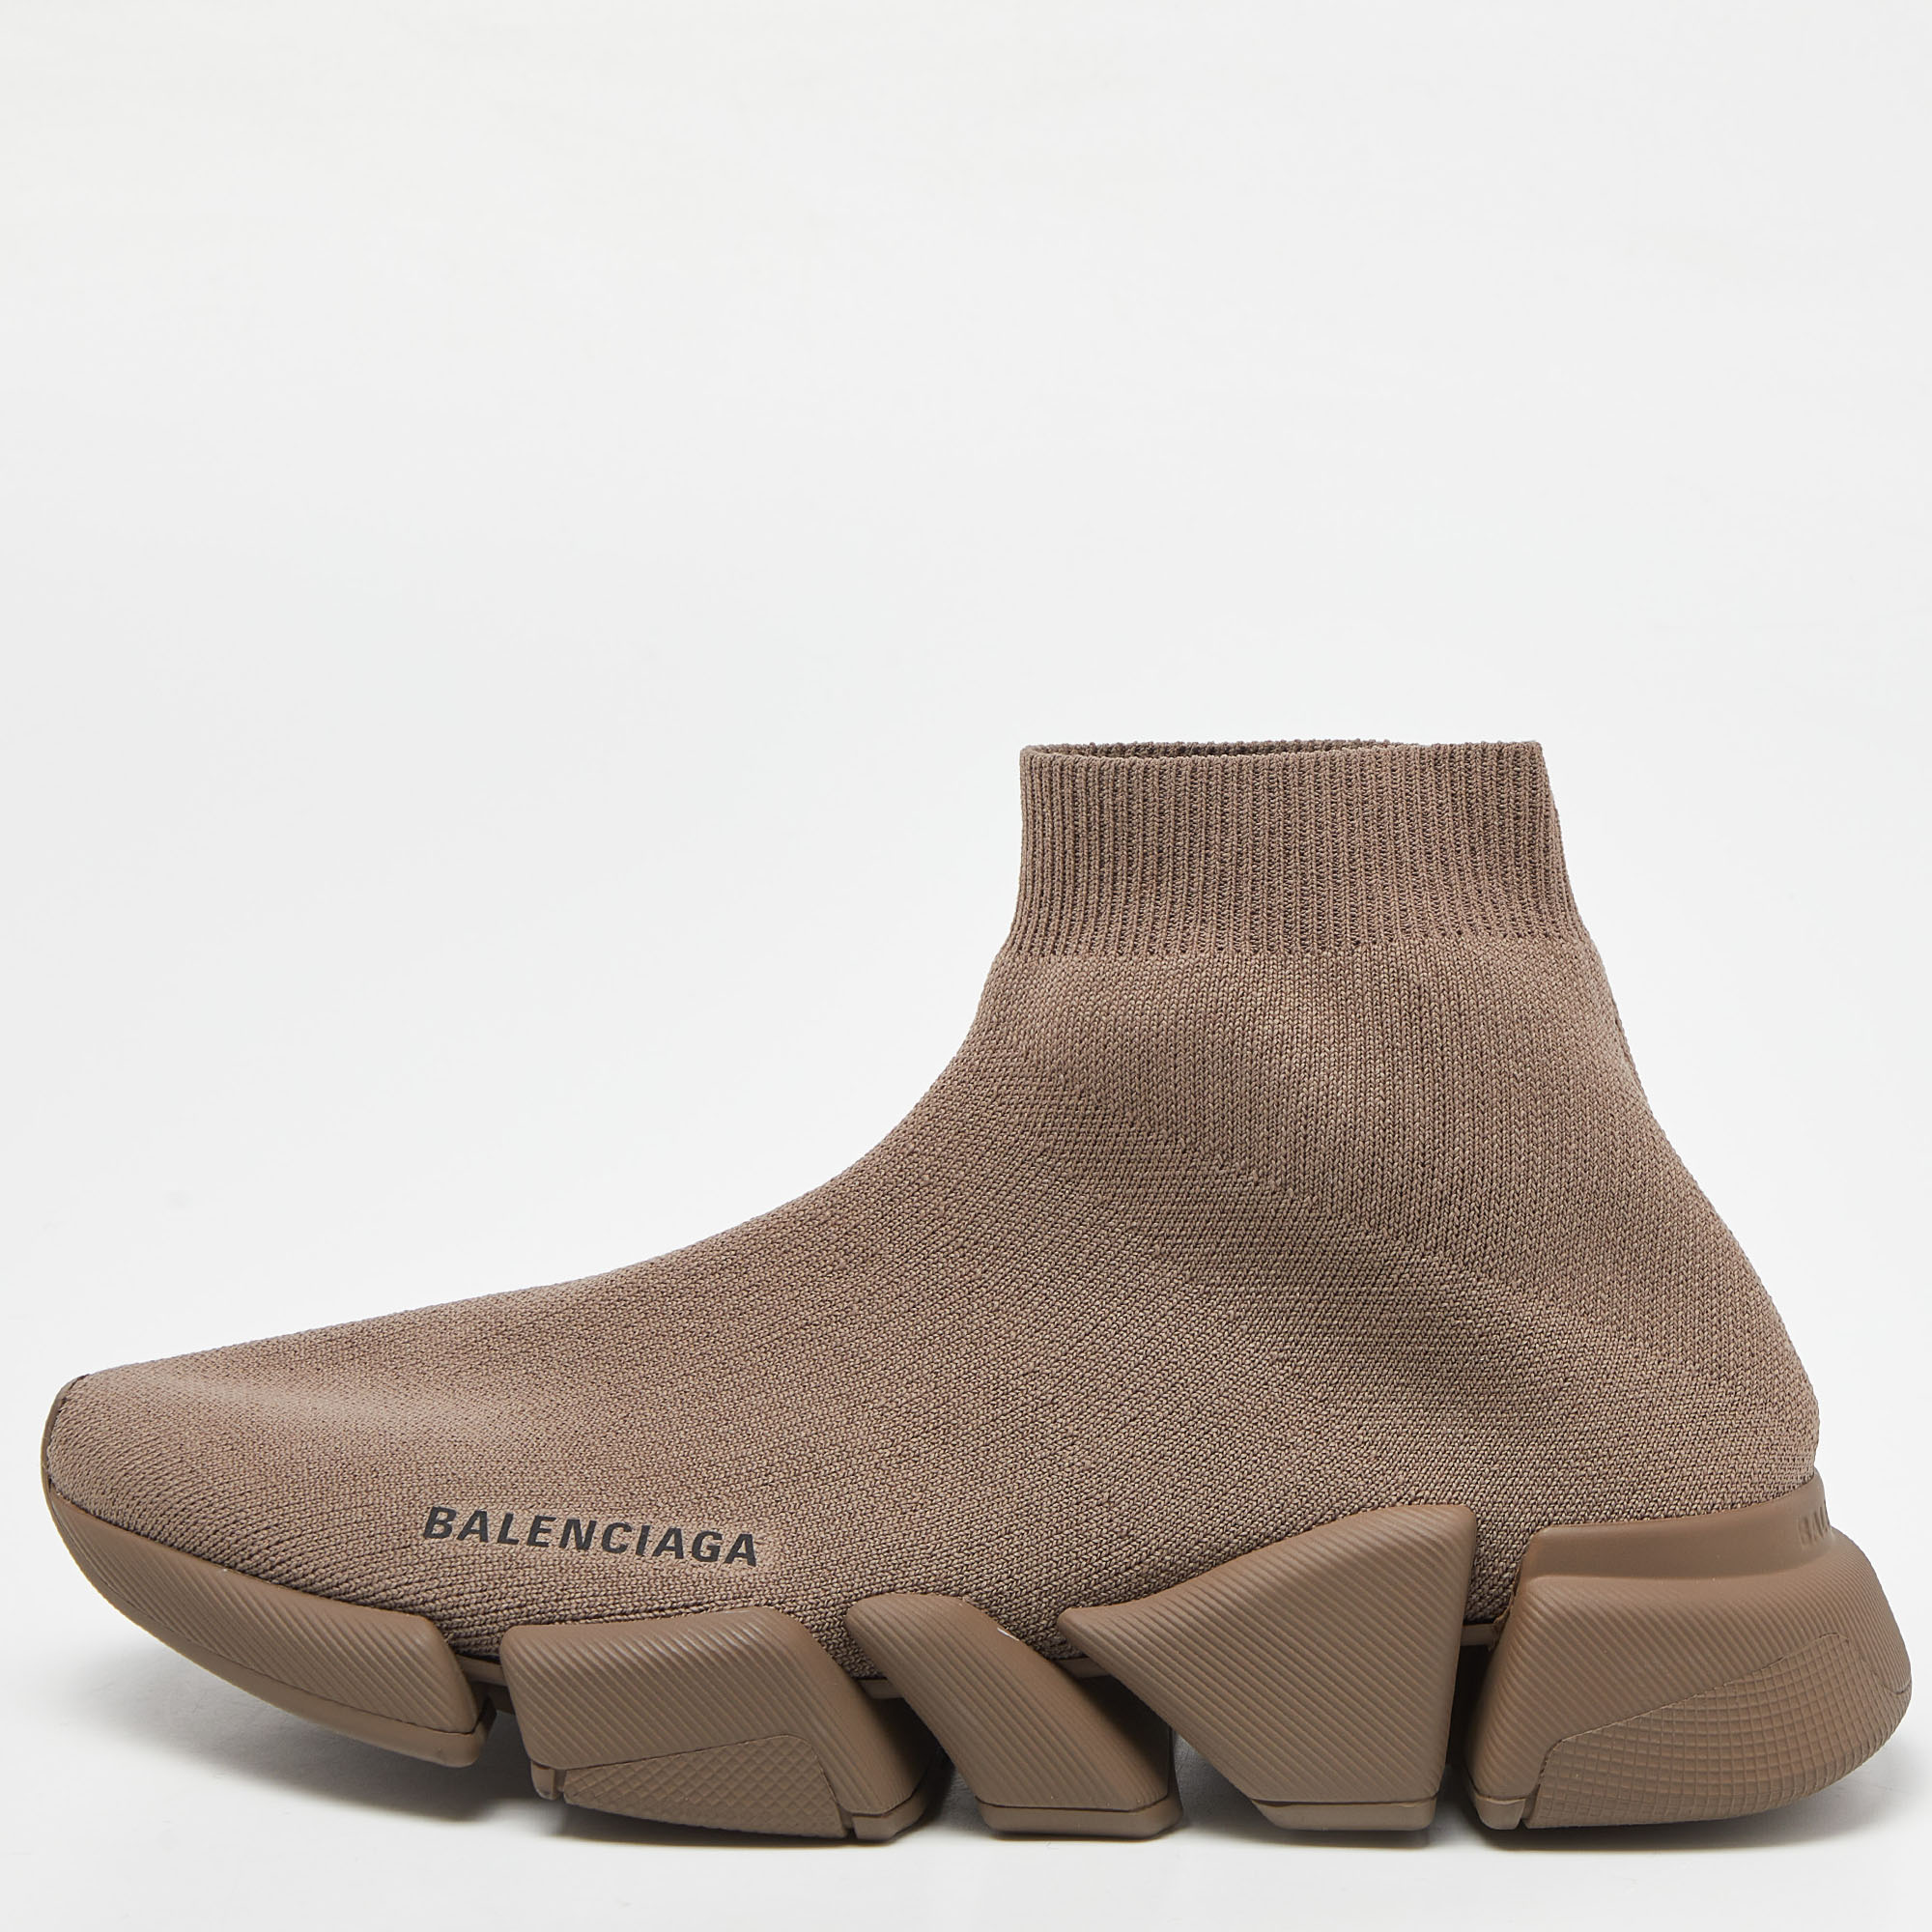 Balenciaga brown knit fabric speed trainer high top sneakers size 39